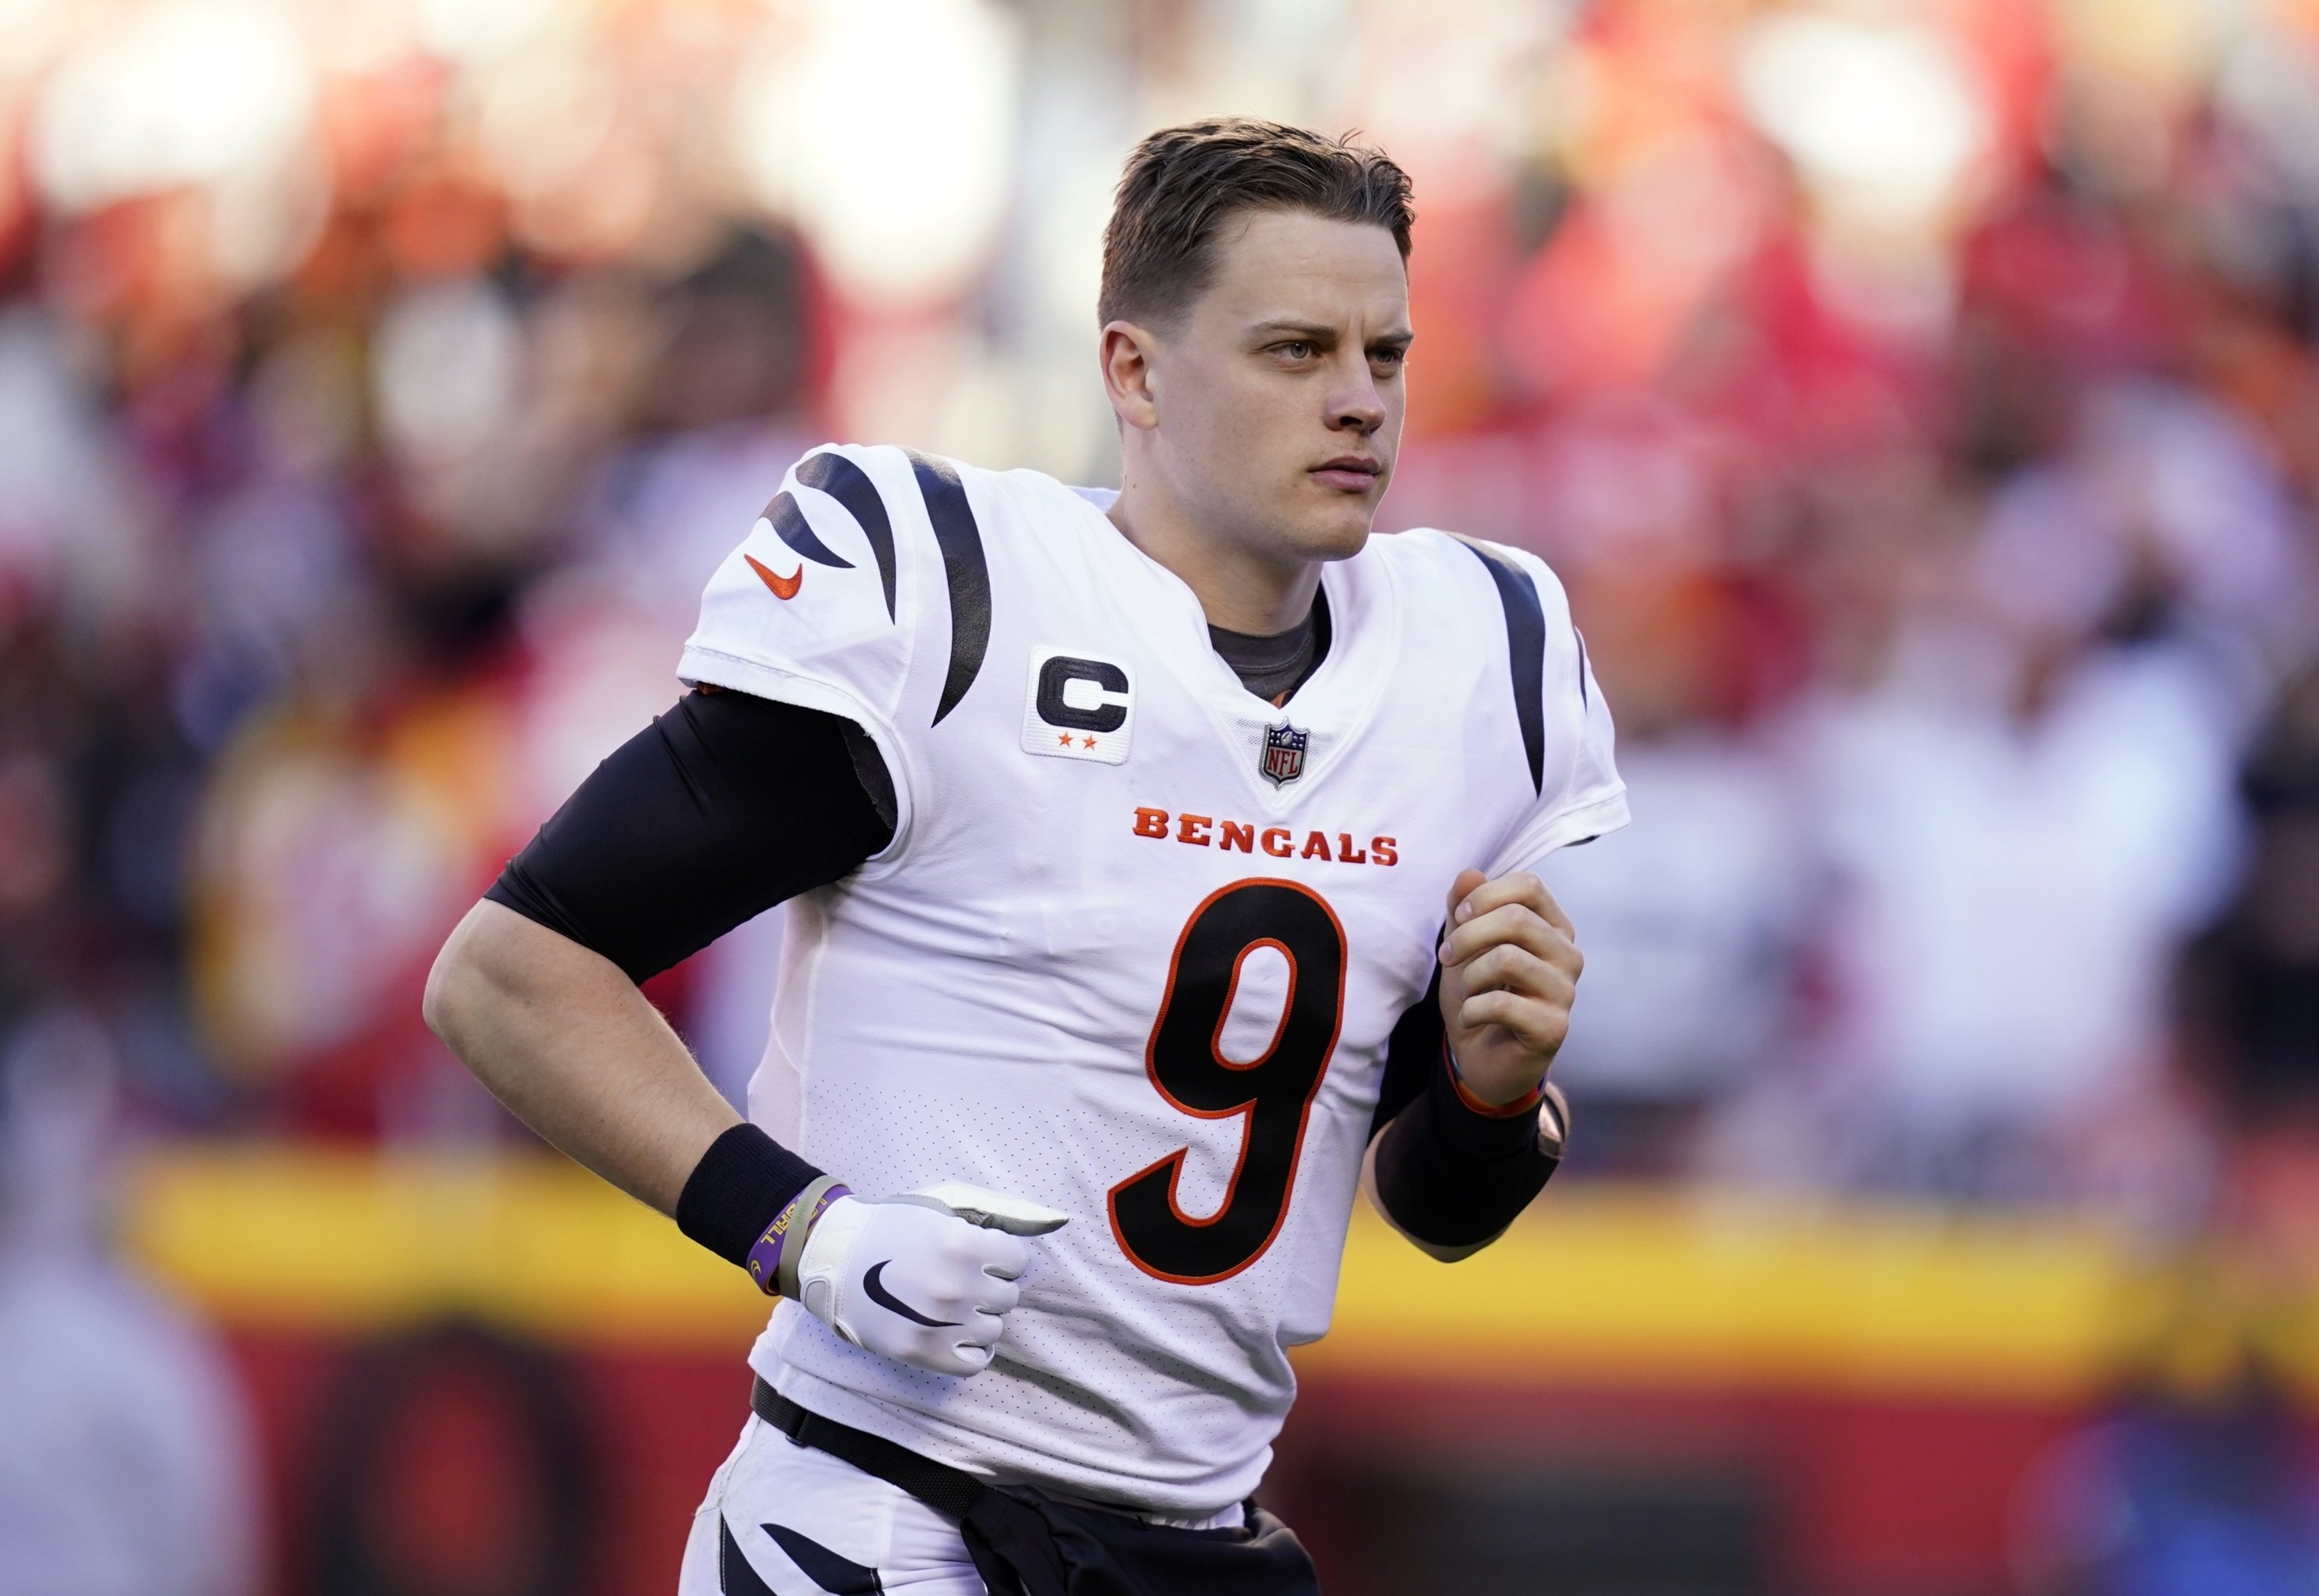 Bengals Won't Go Far in AFC if Joe Burrow, Offense Doesn't Improve